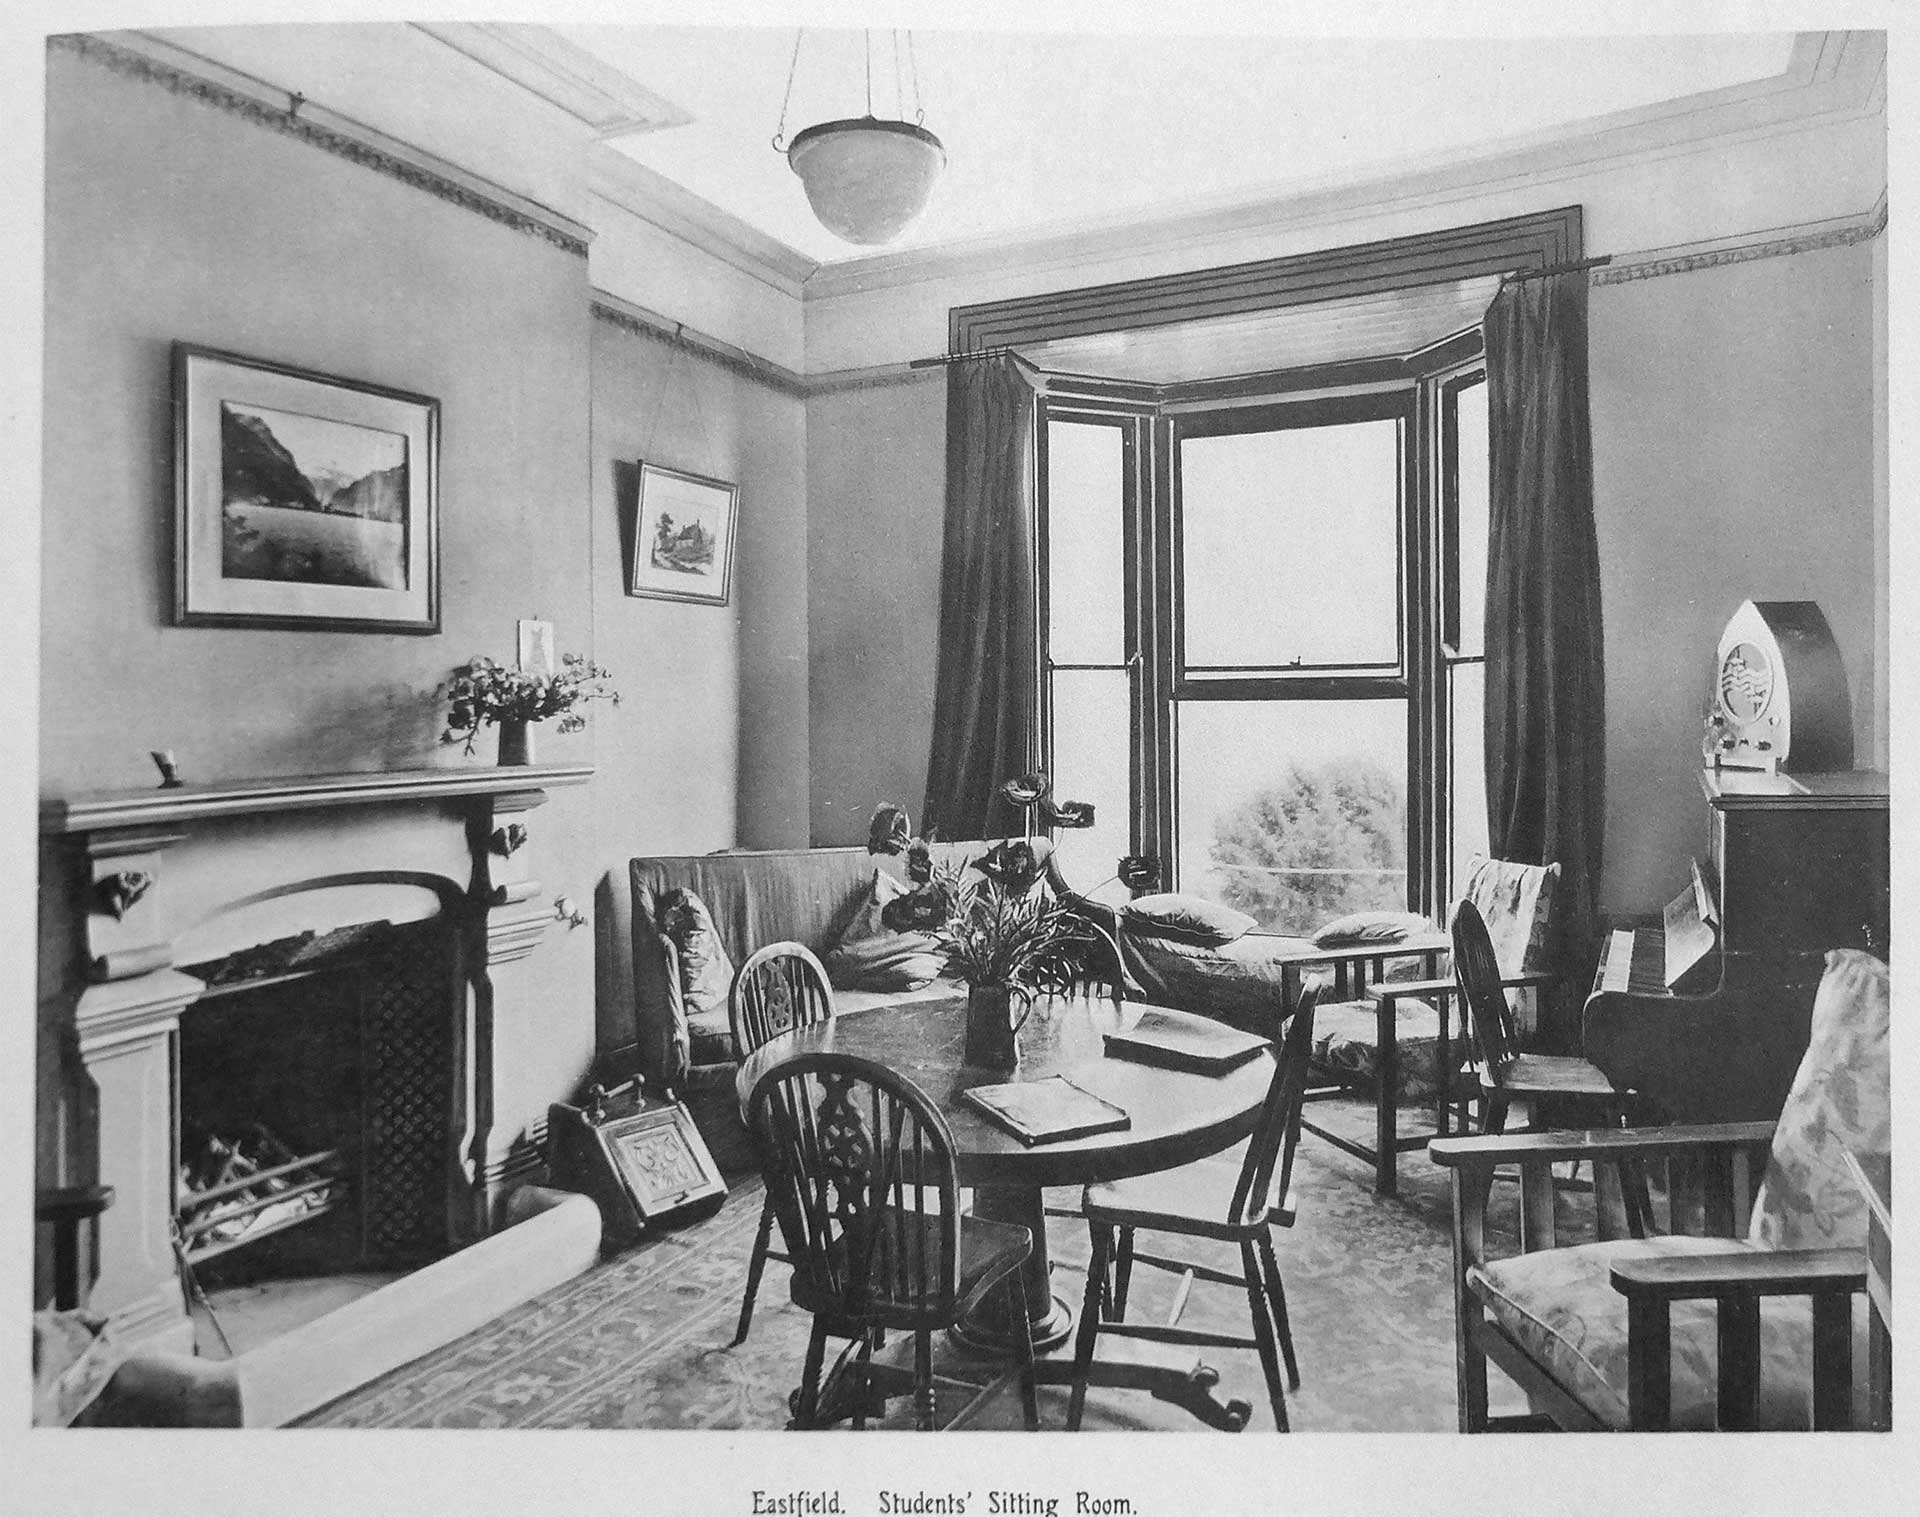 A sitting room at Eastfield